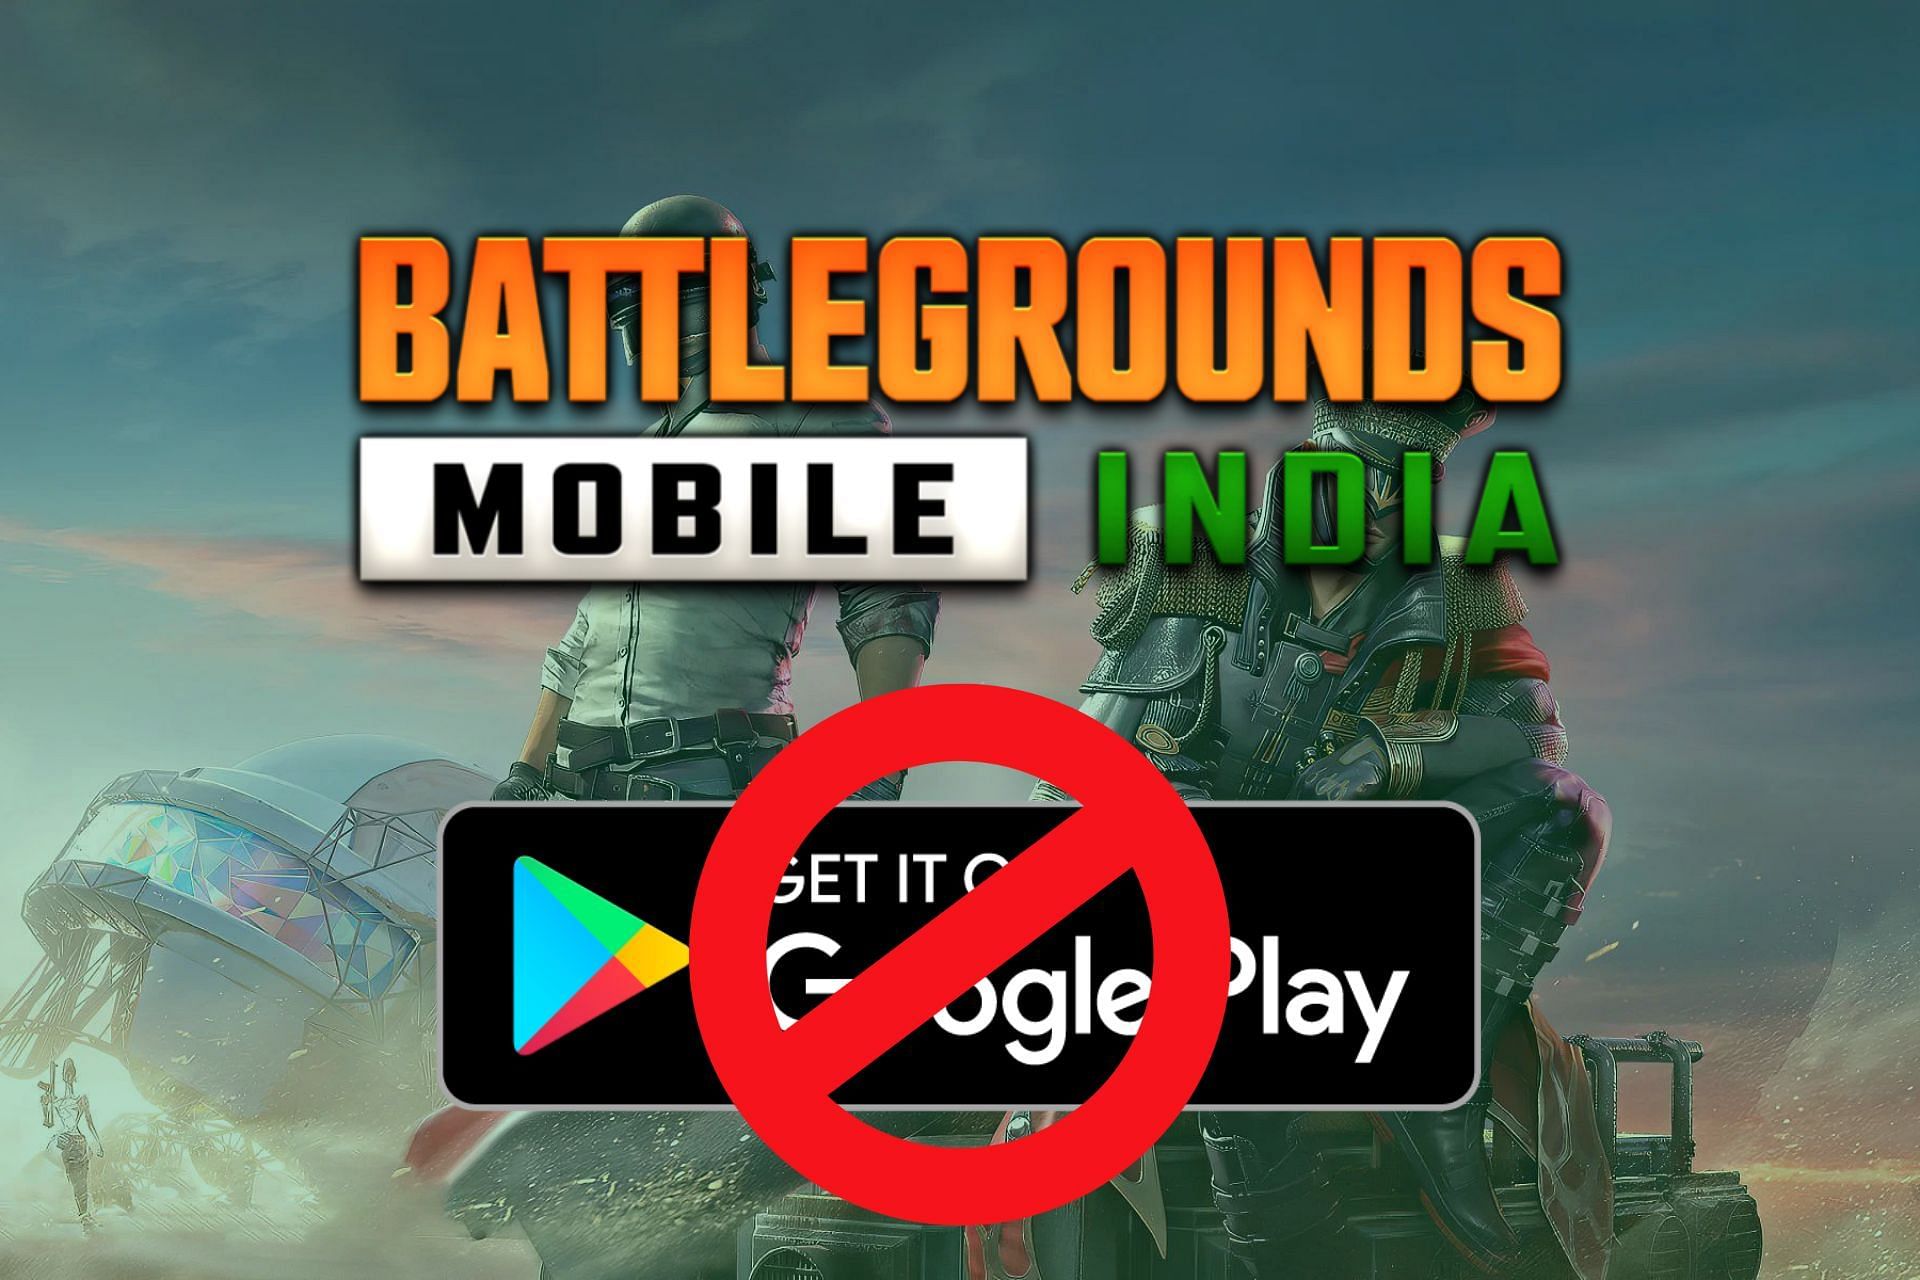 BGMI has disappeared from Google Play Store (Image via Sportskeeda)